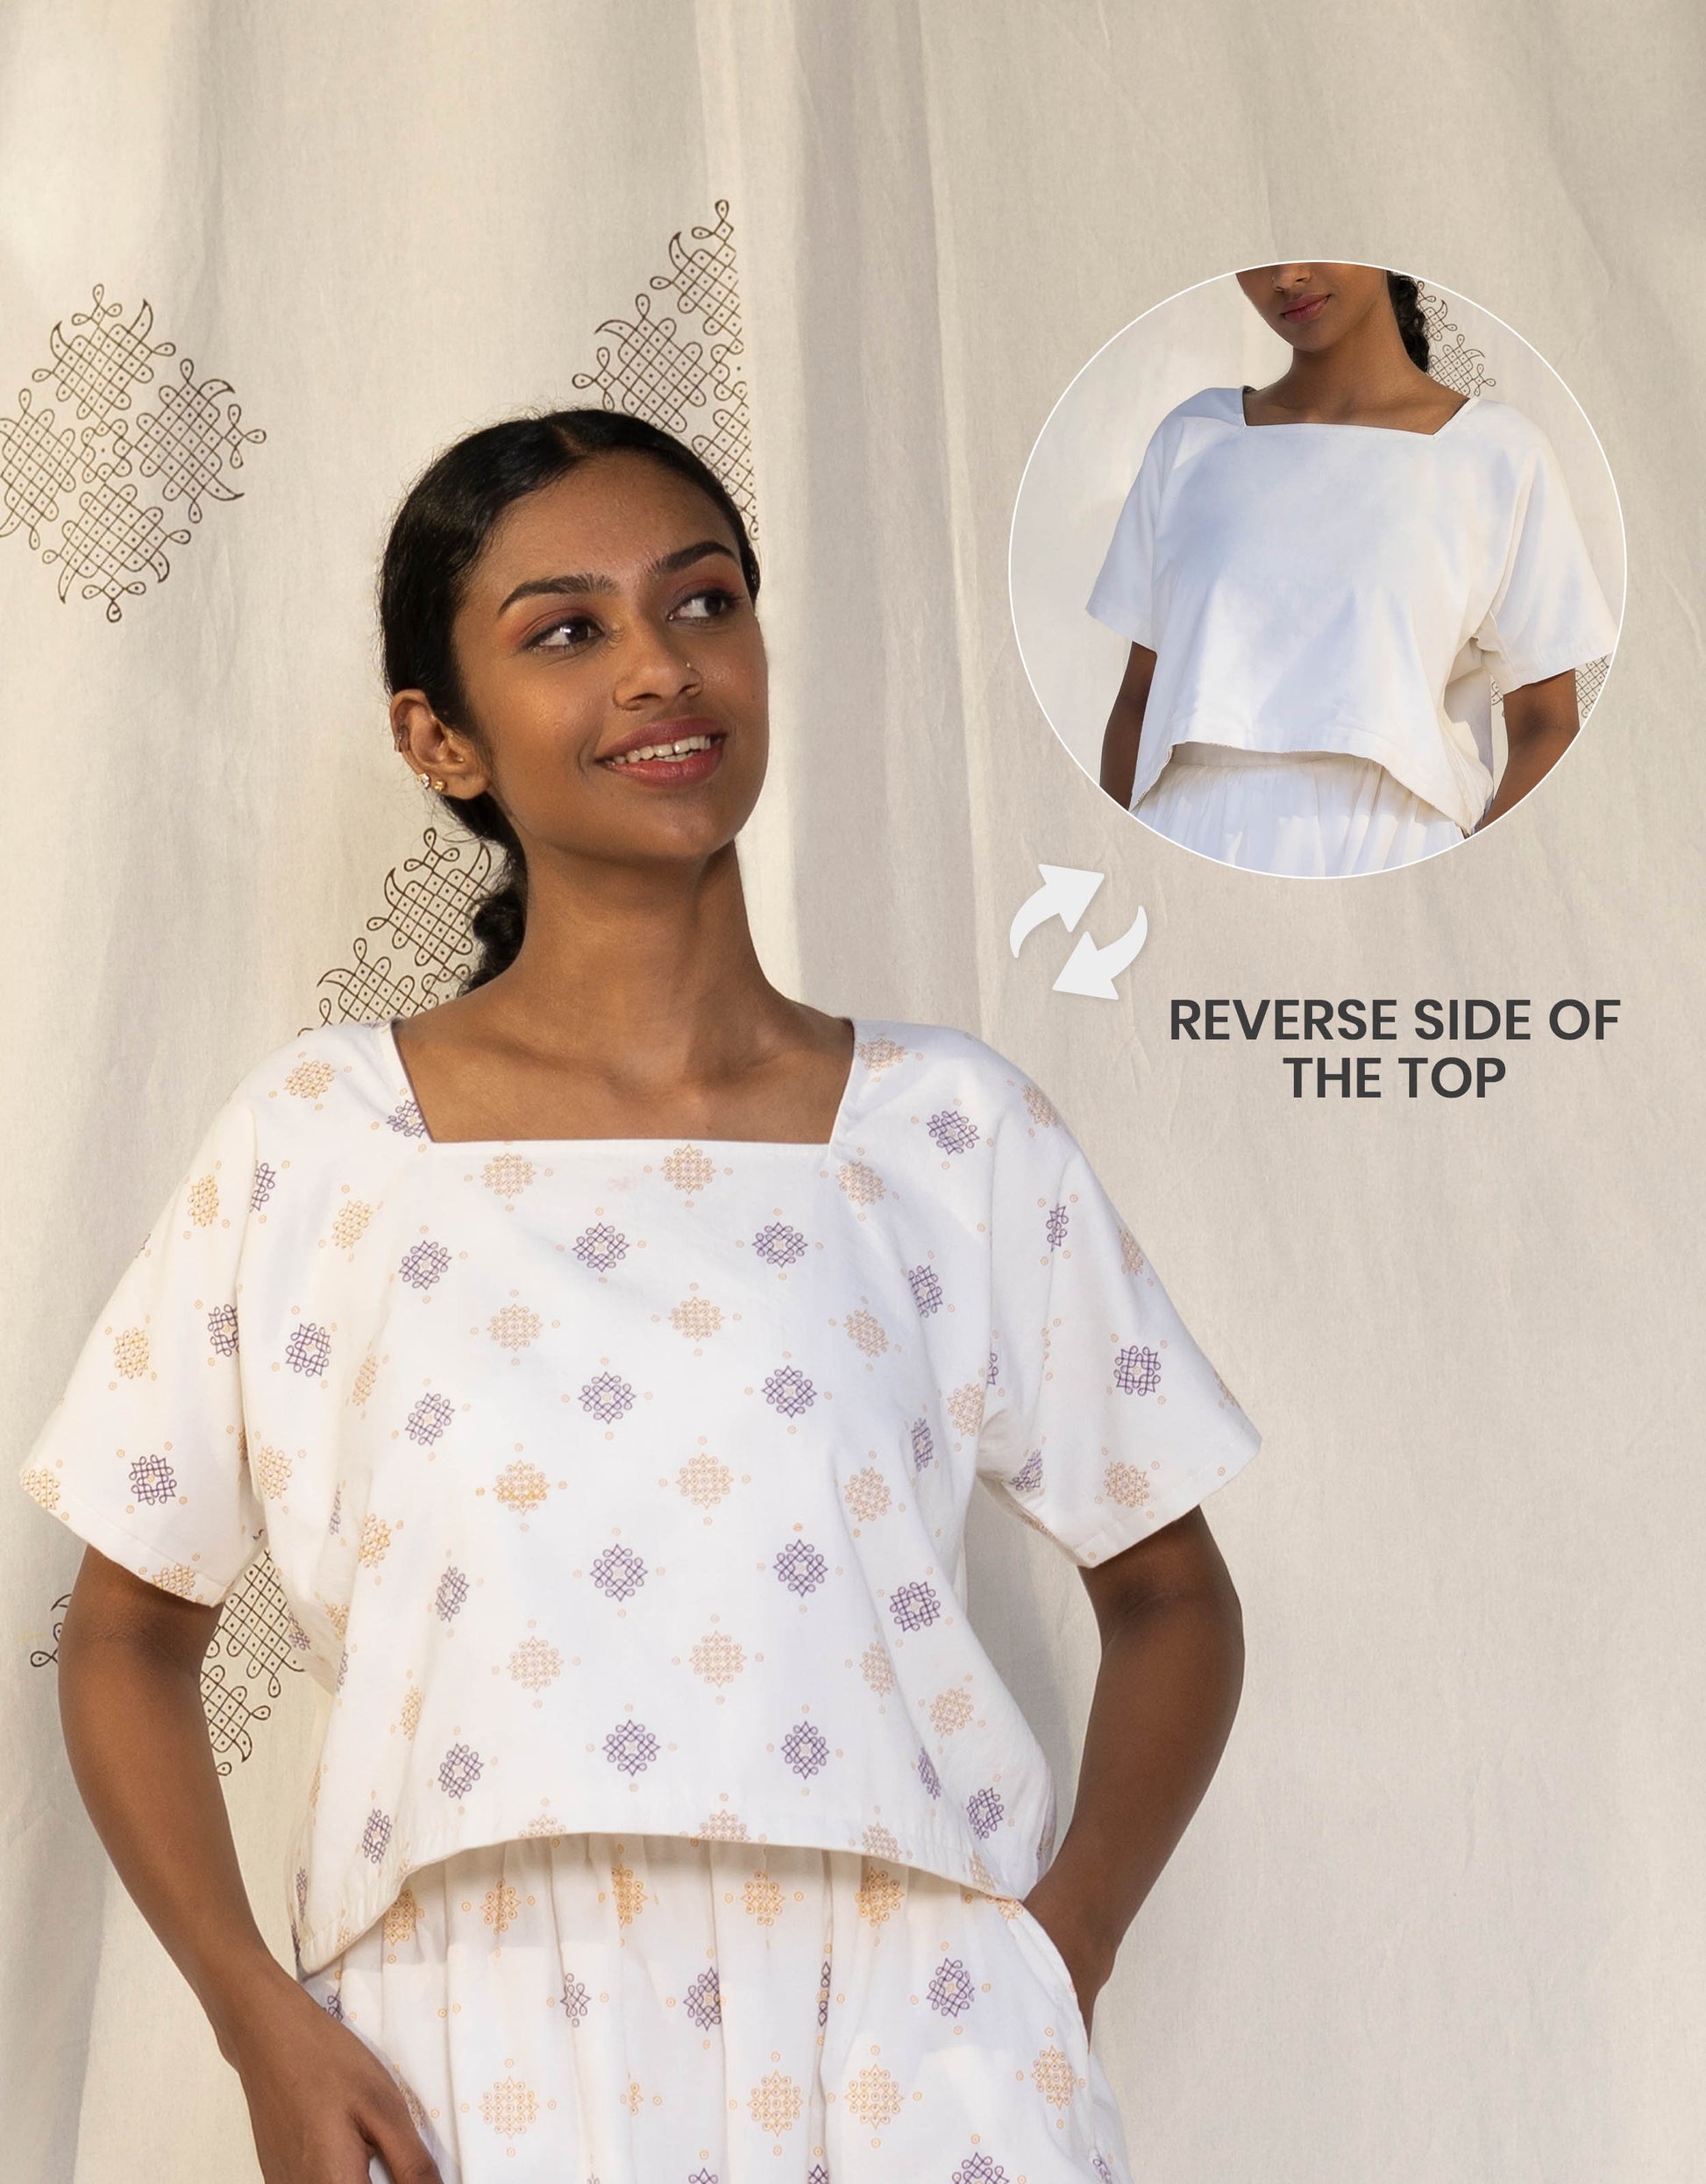 Front view of Hueloom's Reversible Boxy Top in Off-White Kolam print showing versatile reversible option